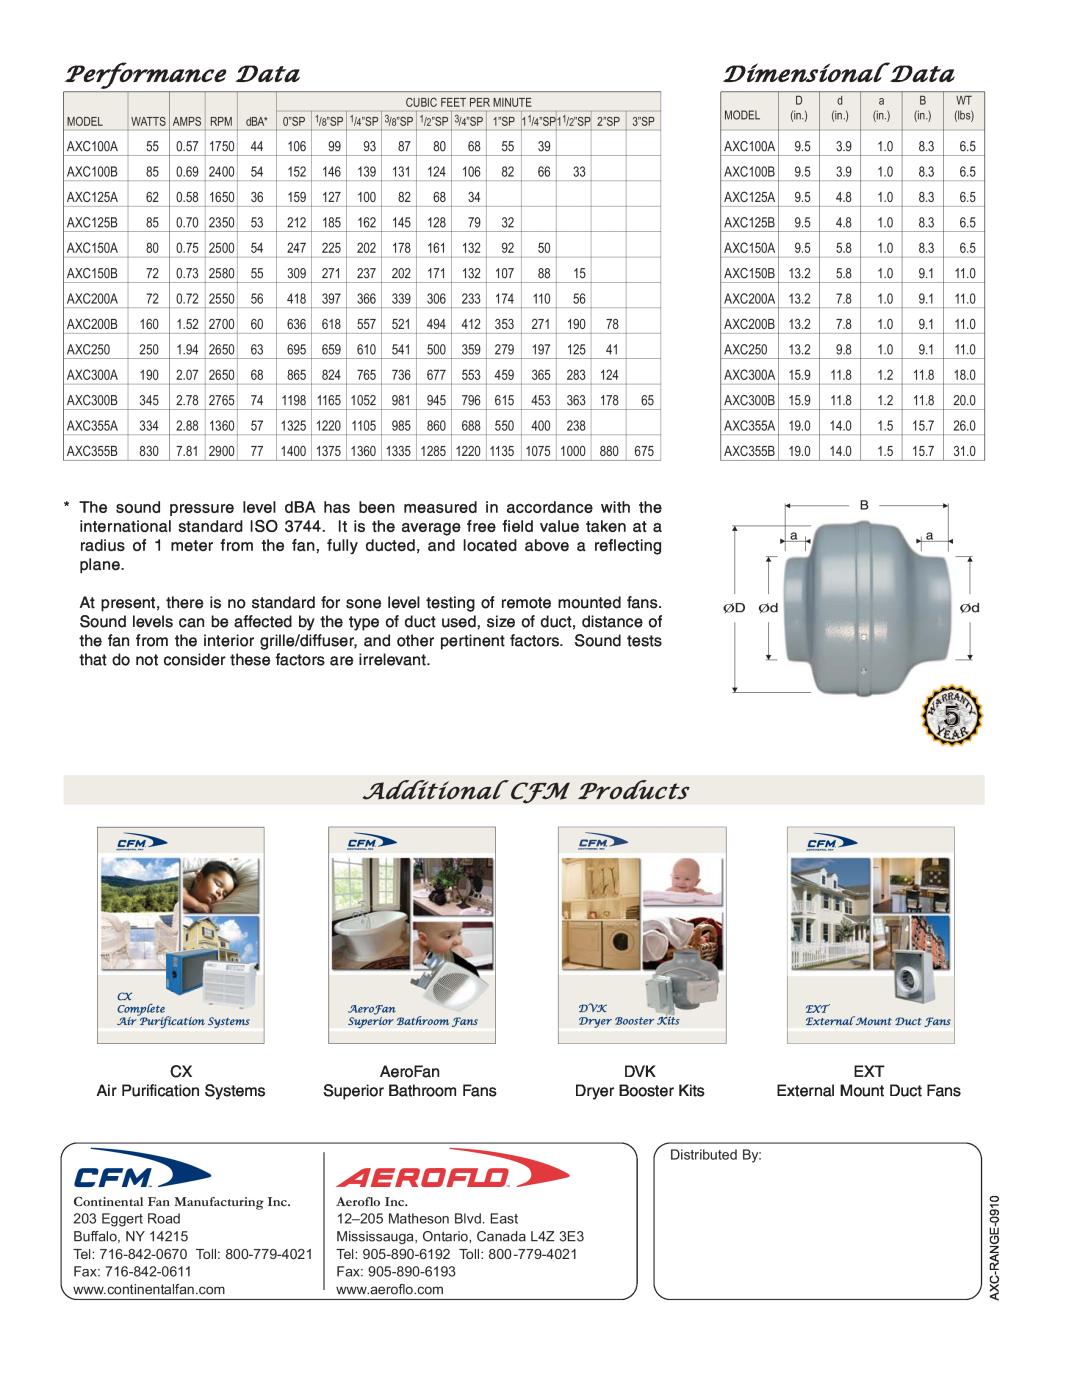 CFM AXC125B Performance Data, Dimensional Data, Additional CFM Products, AXC100A, 1750, AXC100B, 2400, AXC125A, 1650, 2350 